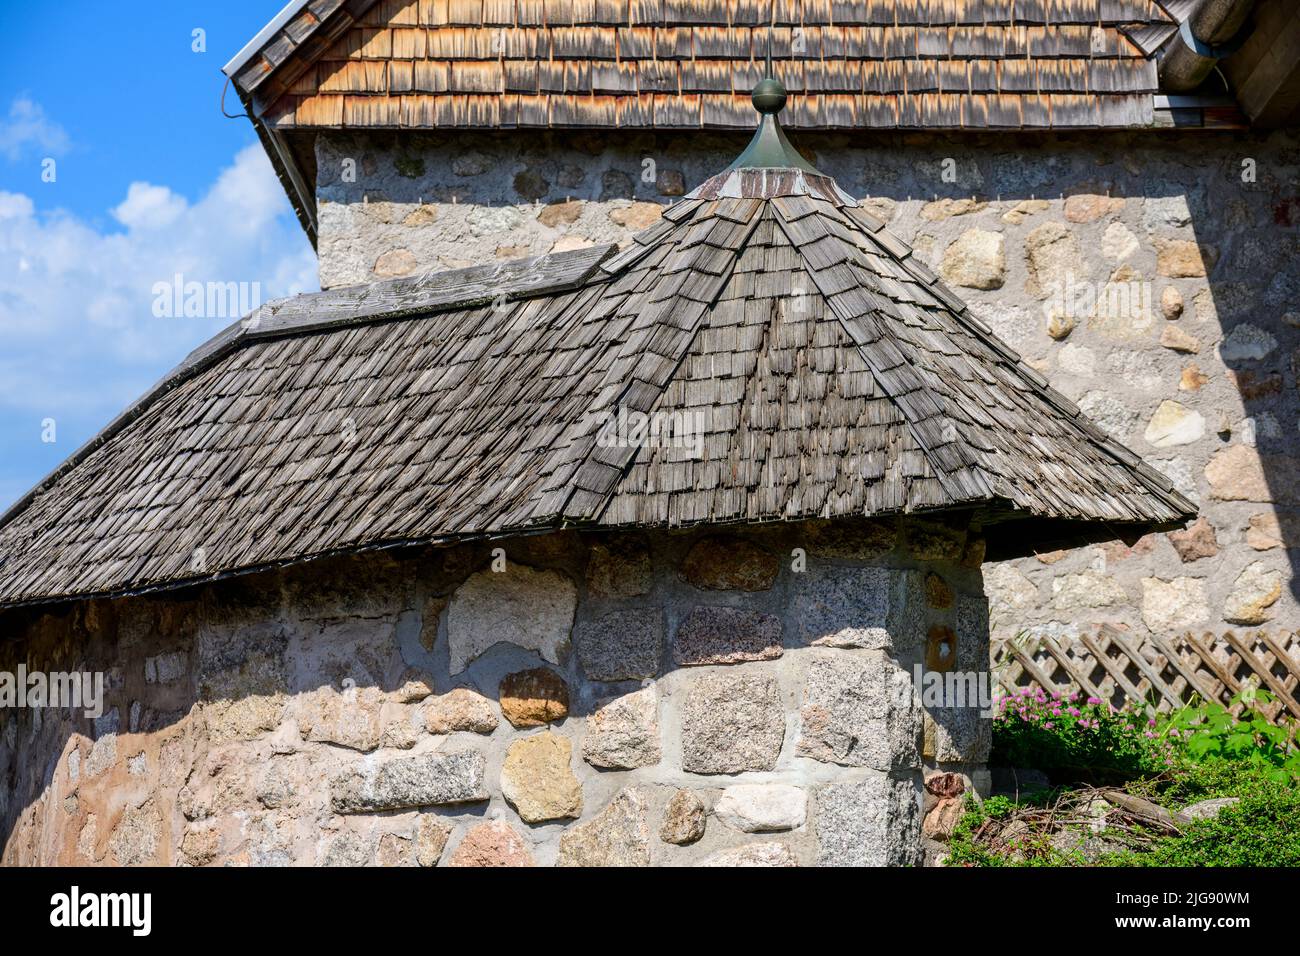 Germany, Baden-Württemberg, Black Forest, shingle roof of St. Nicholas Church Schluchsee (detail). Stock Photo